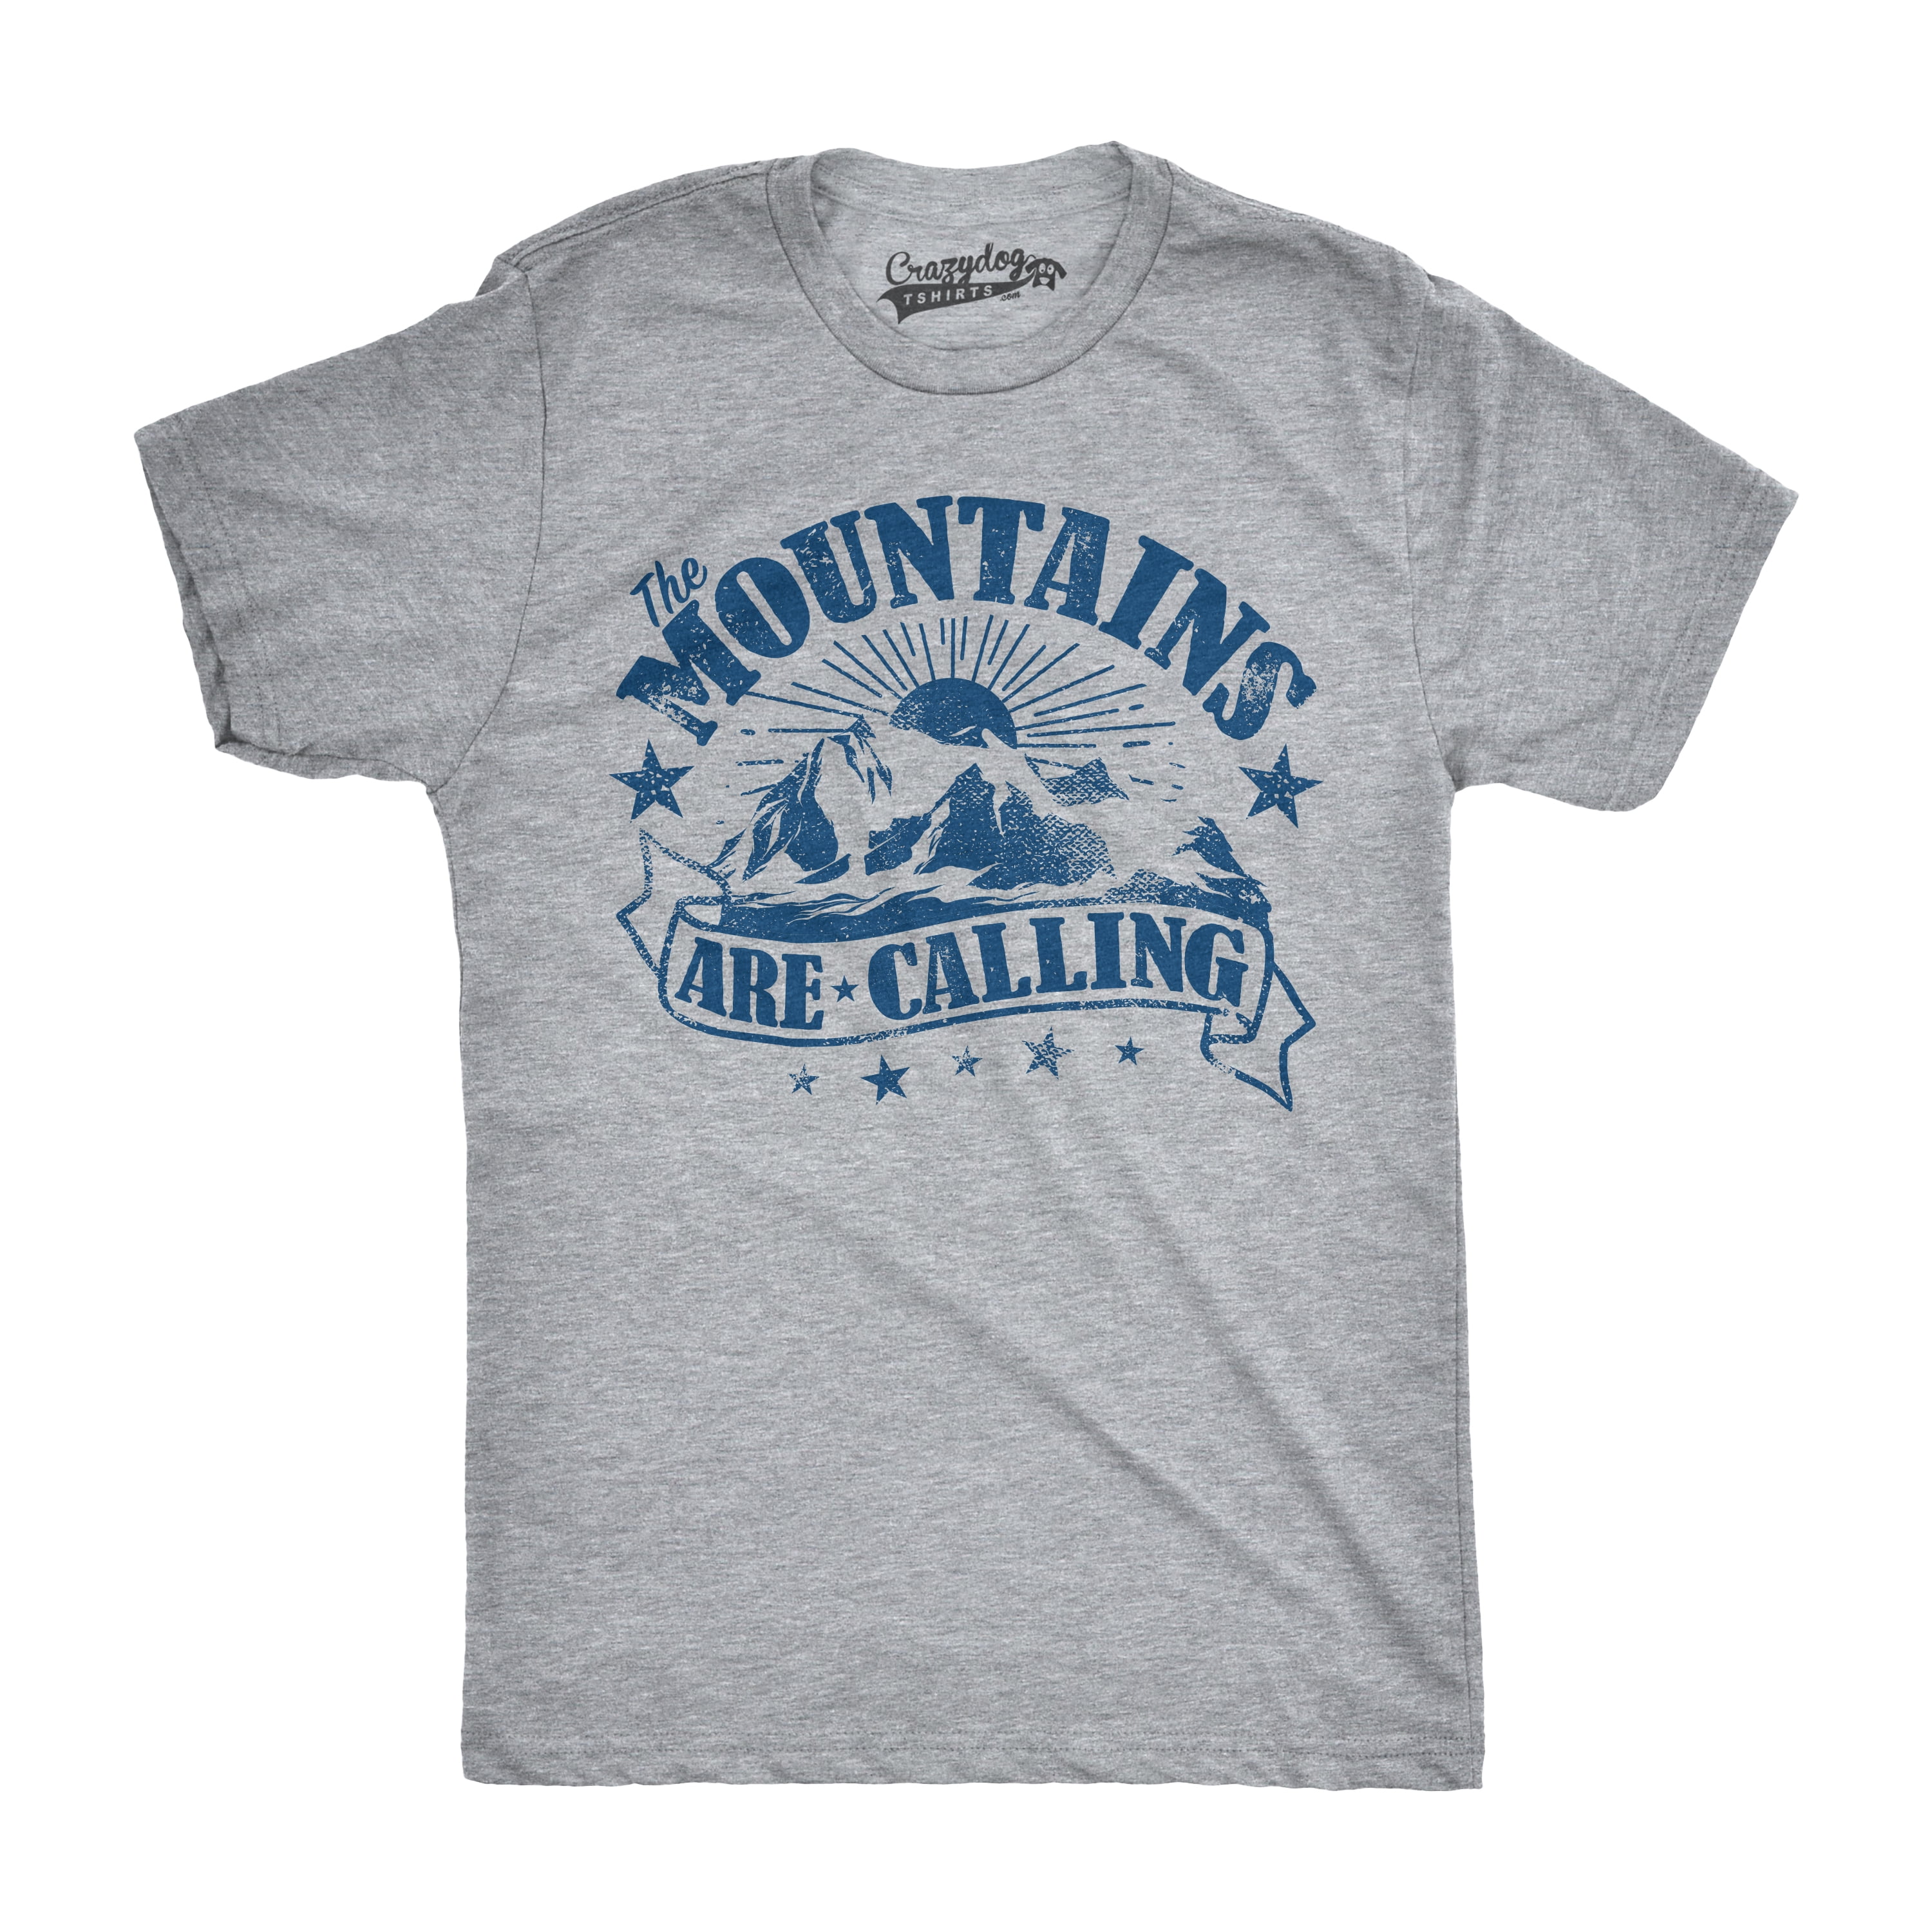 Hiking Shirt Hiking Tees Nature Clothing Nature Tee Outdoor Shirts Mountain Themed T shirt Wilderness Graphic Tee Cool Outdoors Print